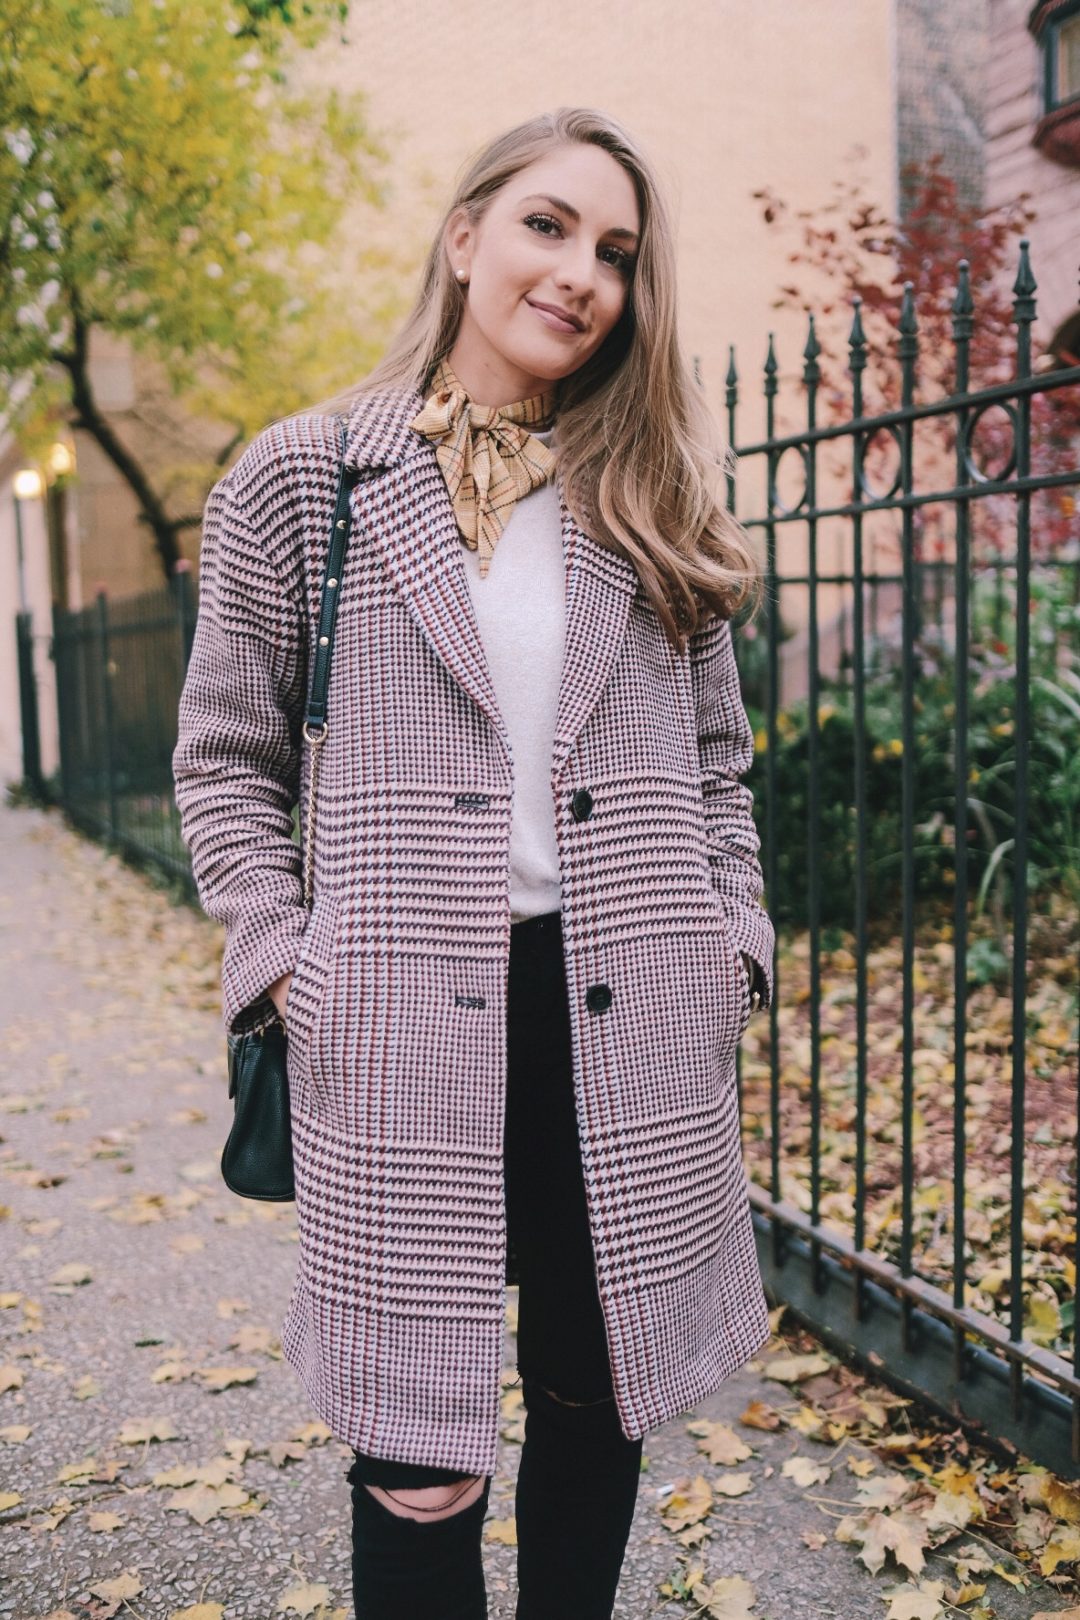 Plaid coat for fall | Miss Madeline Rose